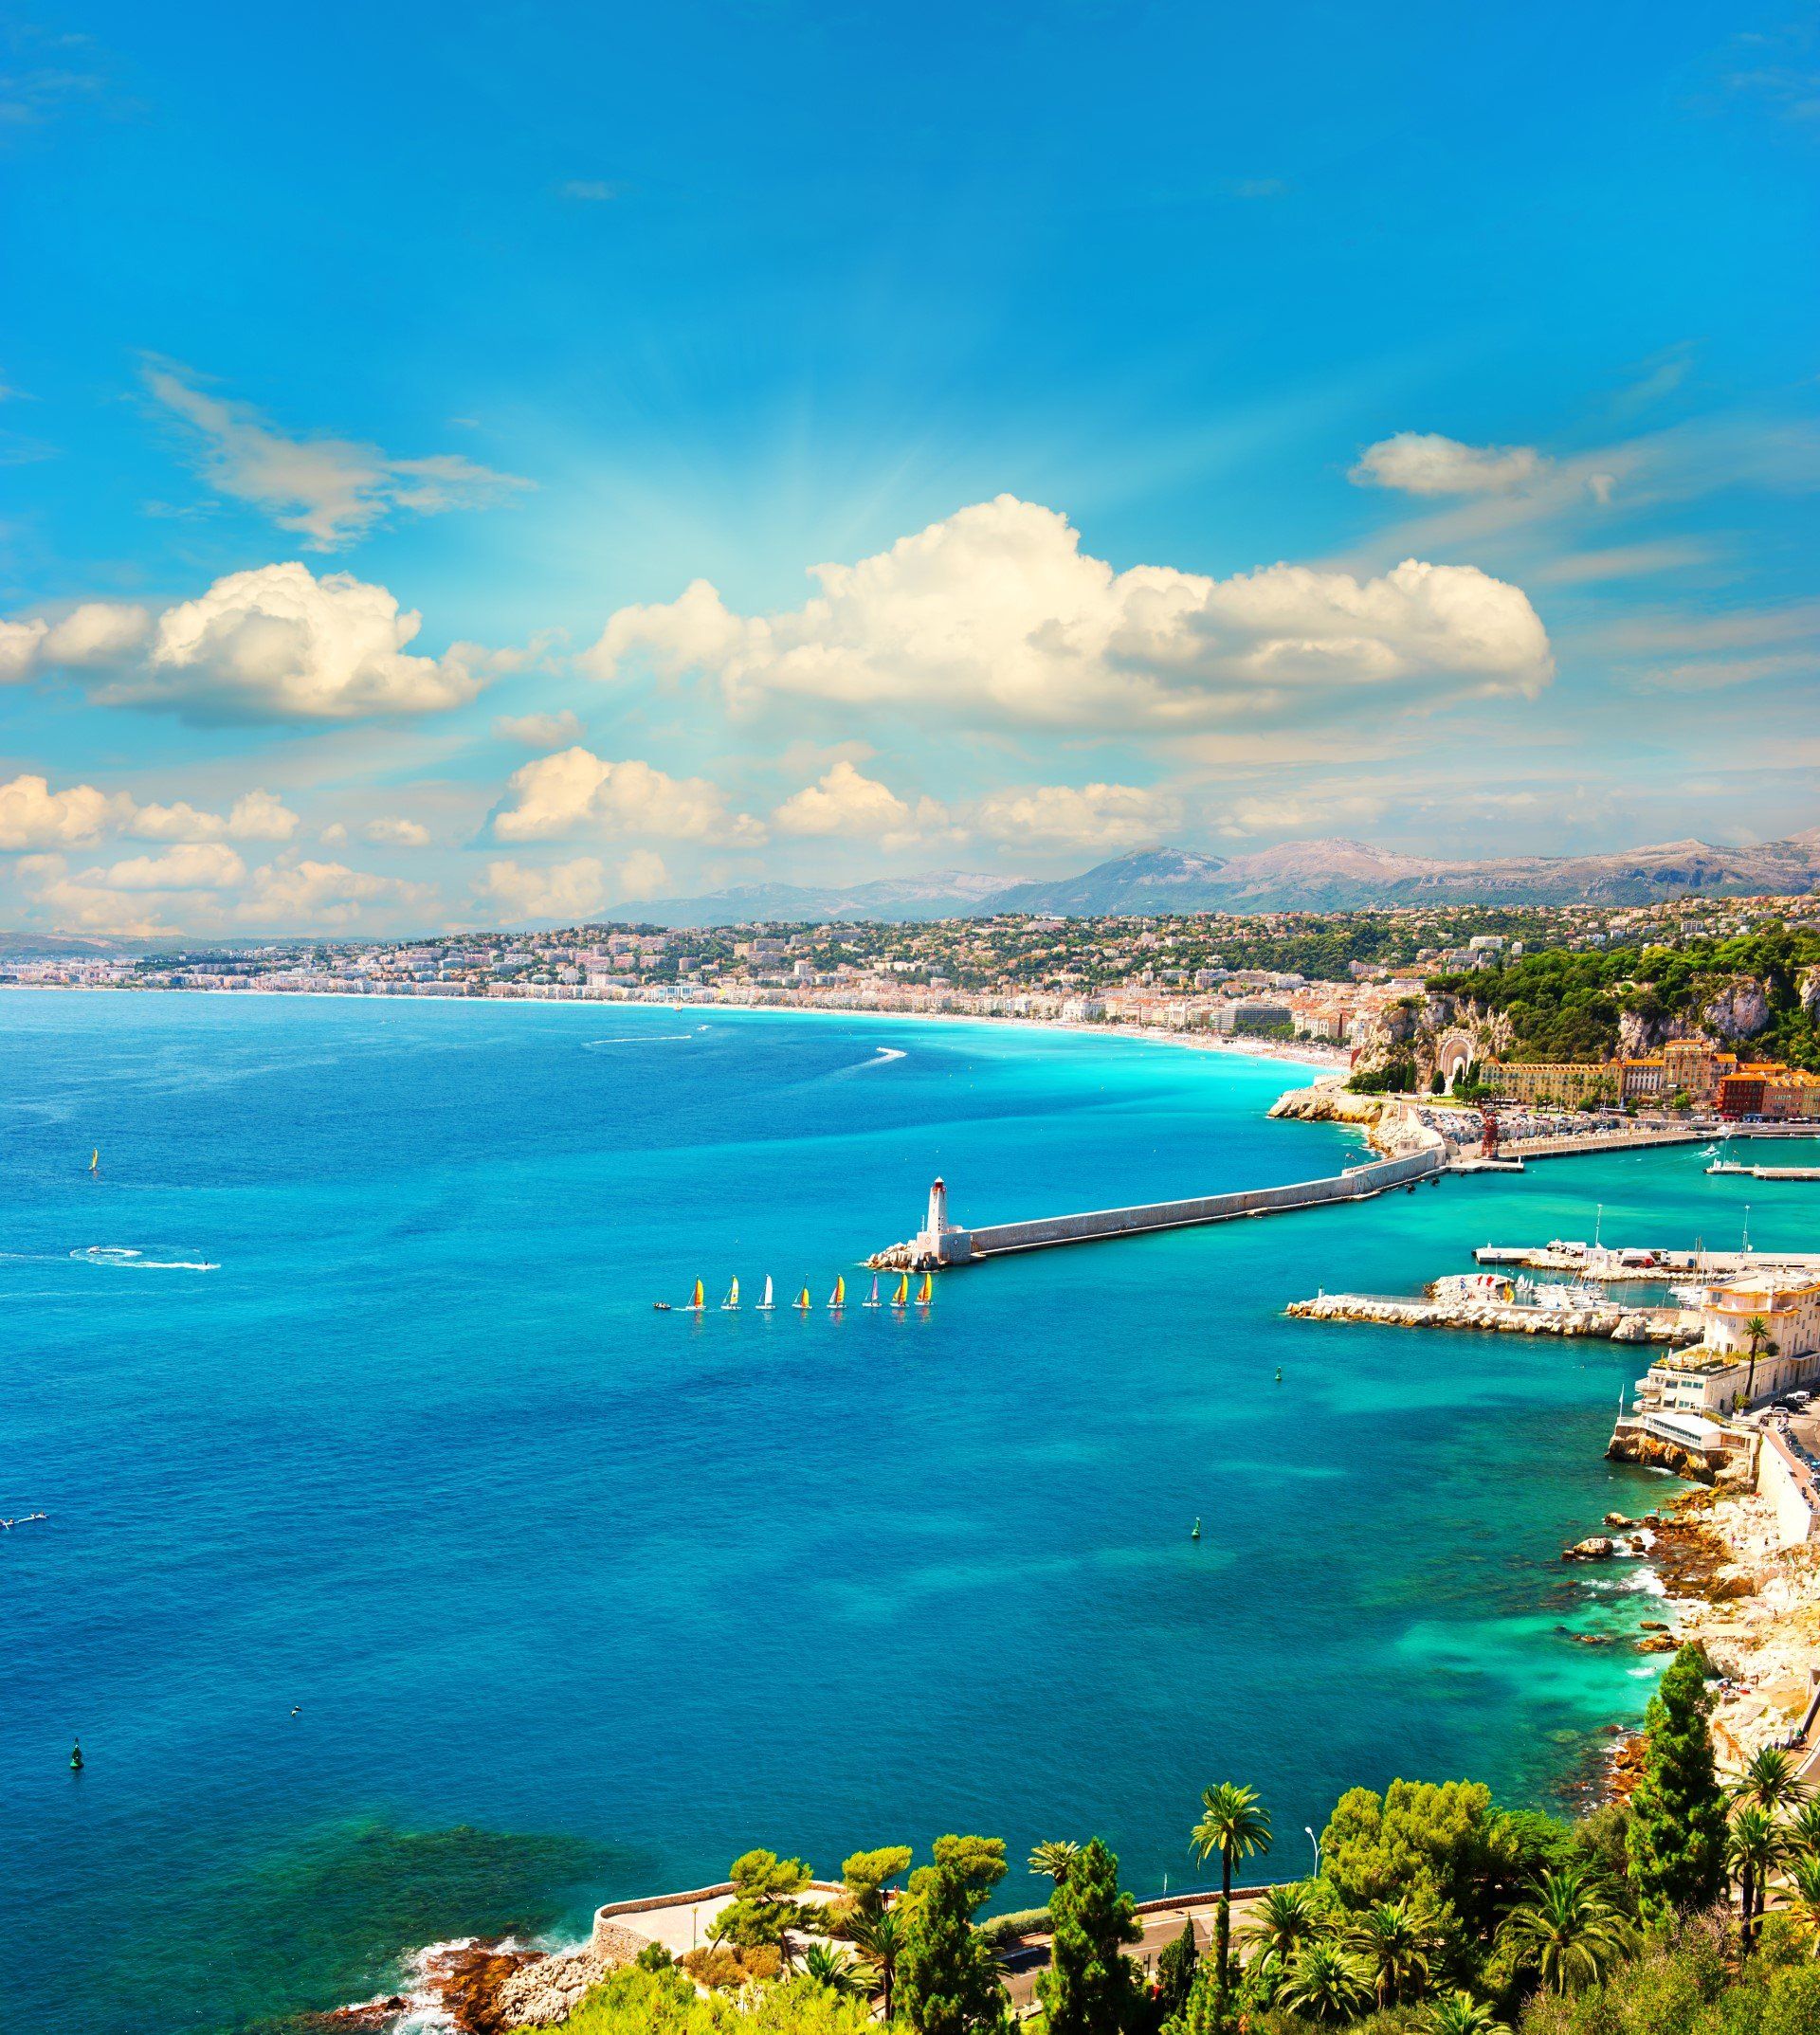 Enjoy a fun-packed holiday by the coast on one of the many beaches along the sun-drenched Cote d'Azur